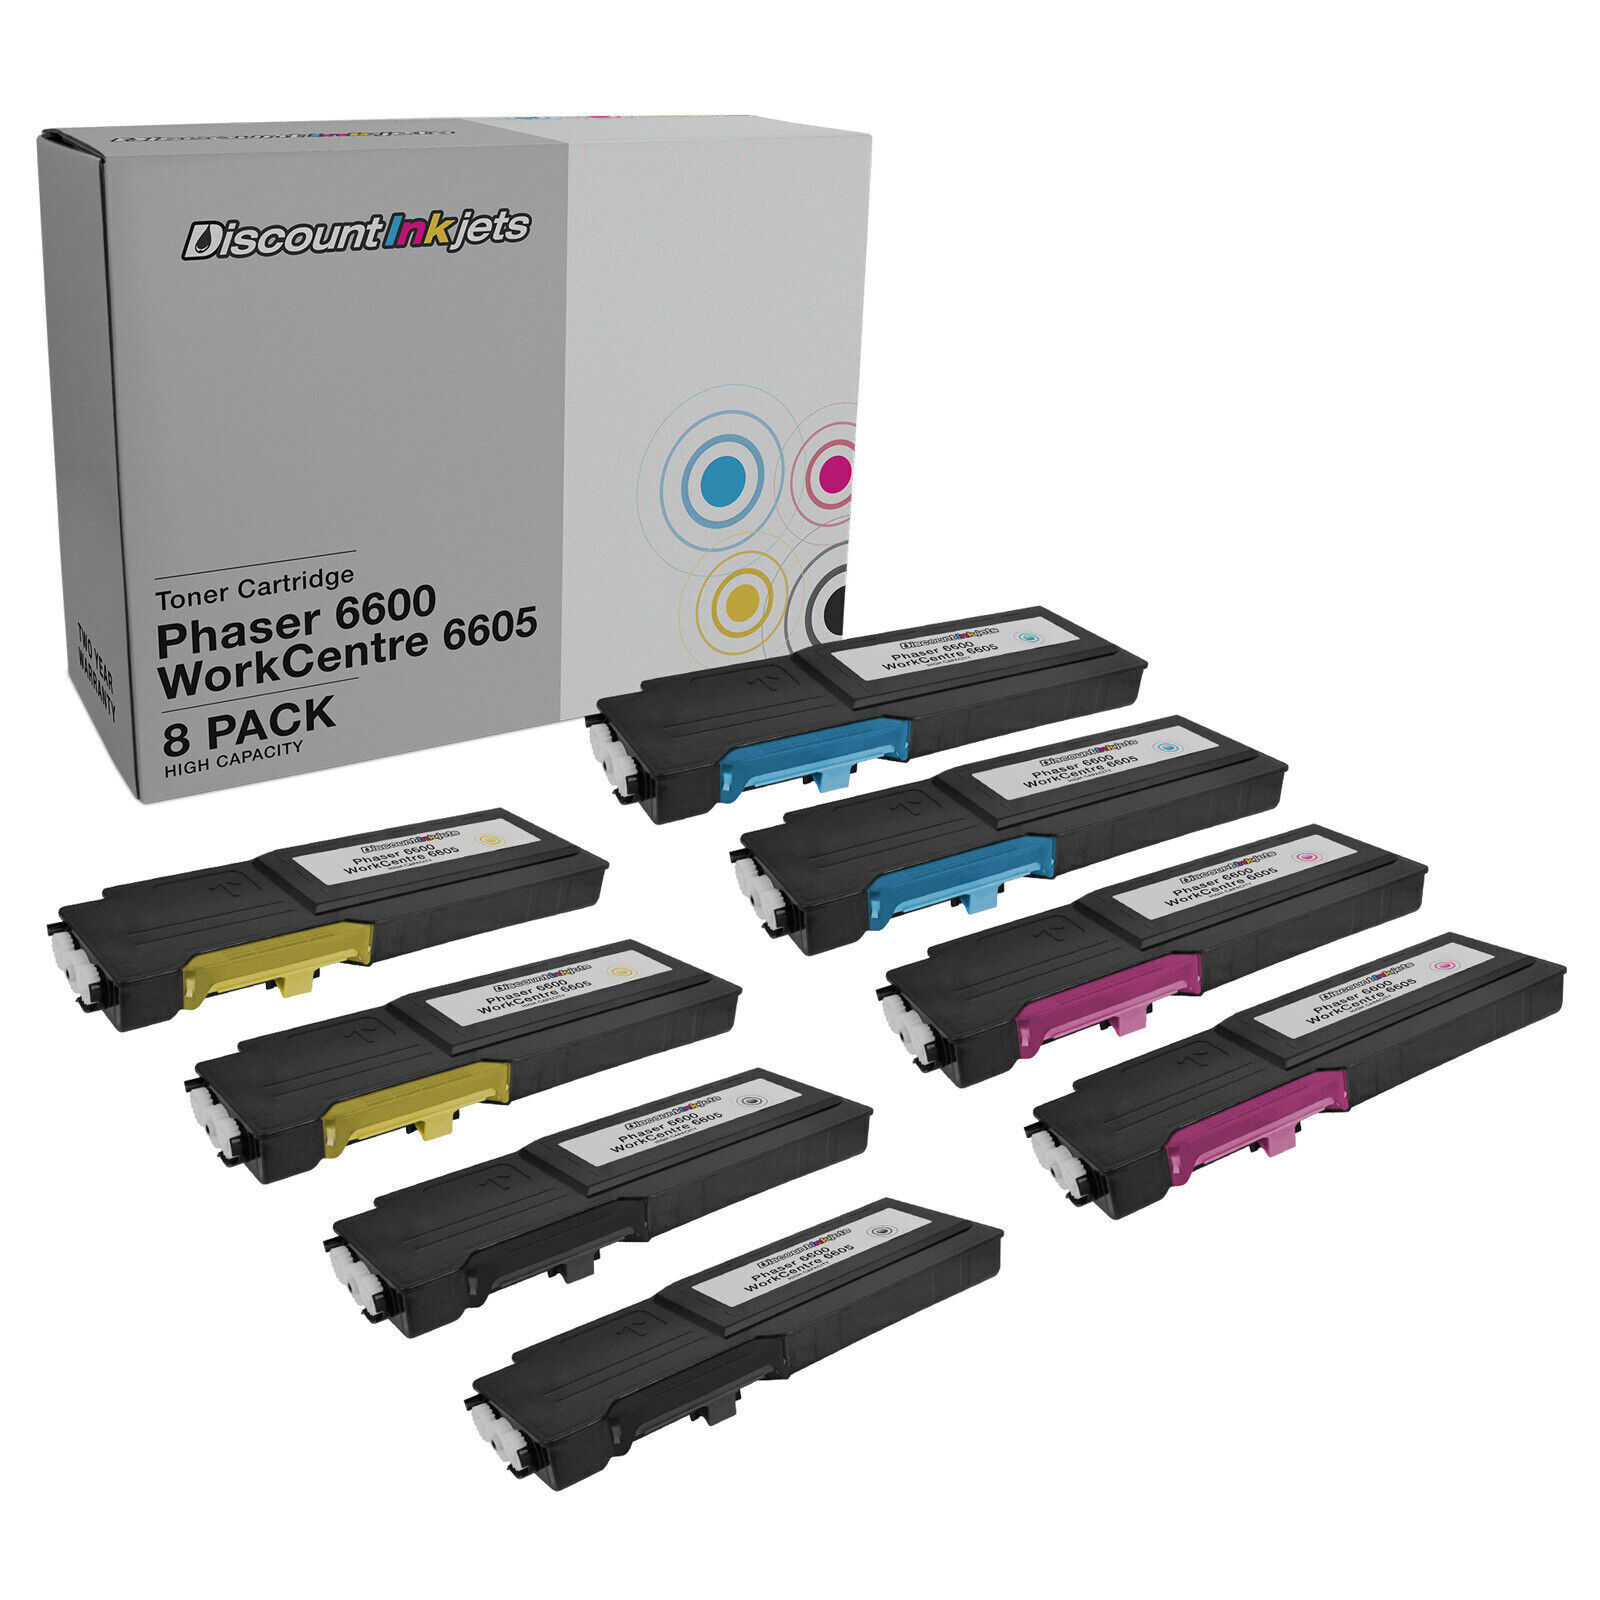 8PK BLACK COLOR Toner for Xerox Phaser 6600 HY Cartridge WorkCentre 6605dn 6605n